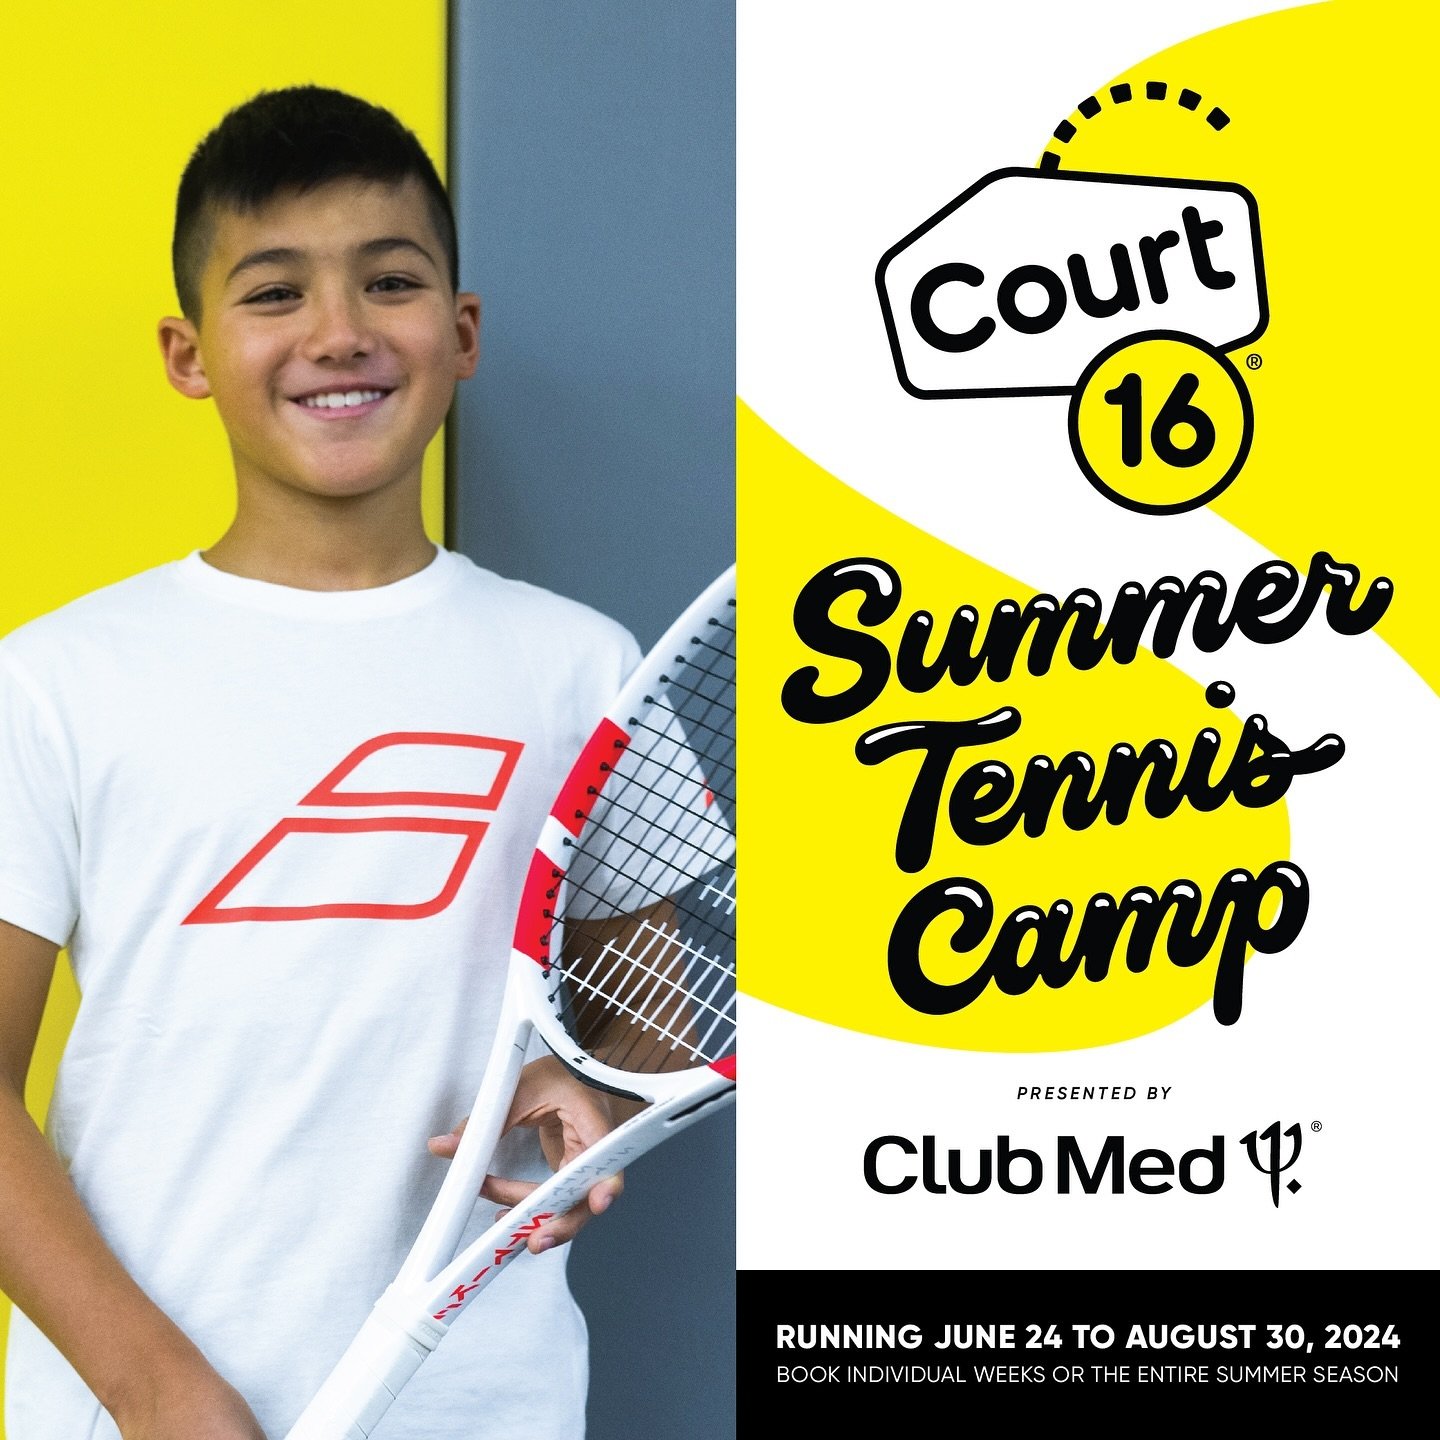 🎾 Get ready to serve up some fun with our Summer Camp proudly presented by @clubmed &lsquo;s all-inclusive resorts 🌞 Whether you&rsquo;re booking just a week or the whole summer, there&rsquo;s a place for every kid aged 5-12. Join us at our LIC, BK